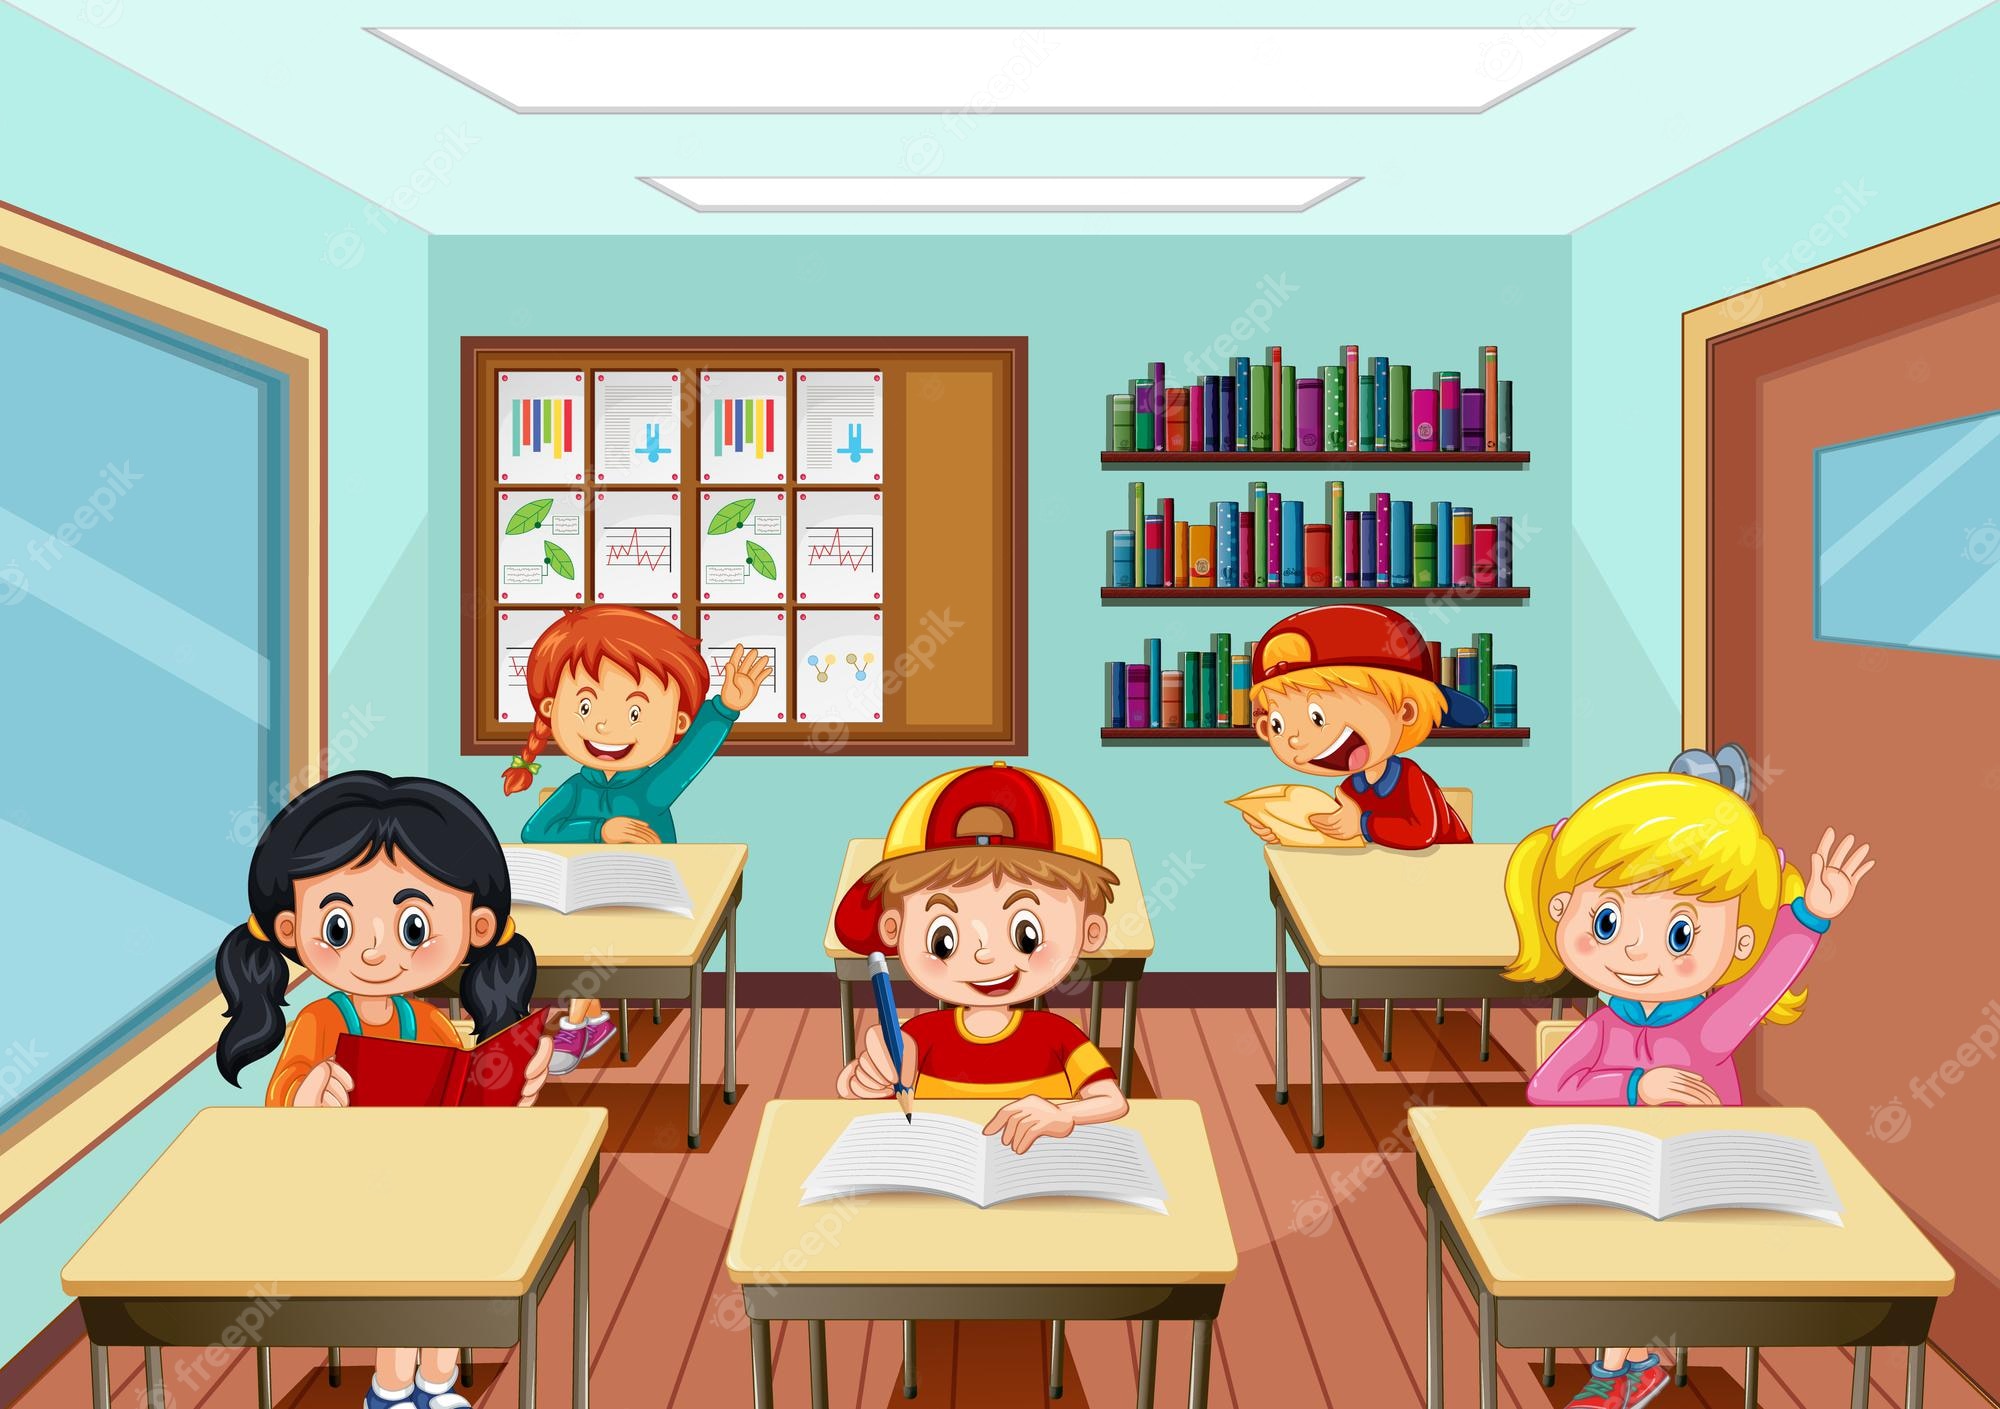 Classroom Clipart Images - Free Download on Clipart Library - Clip Art ...